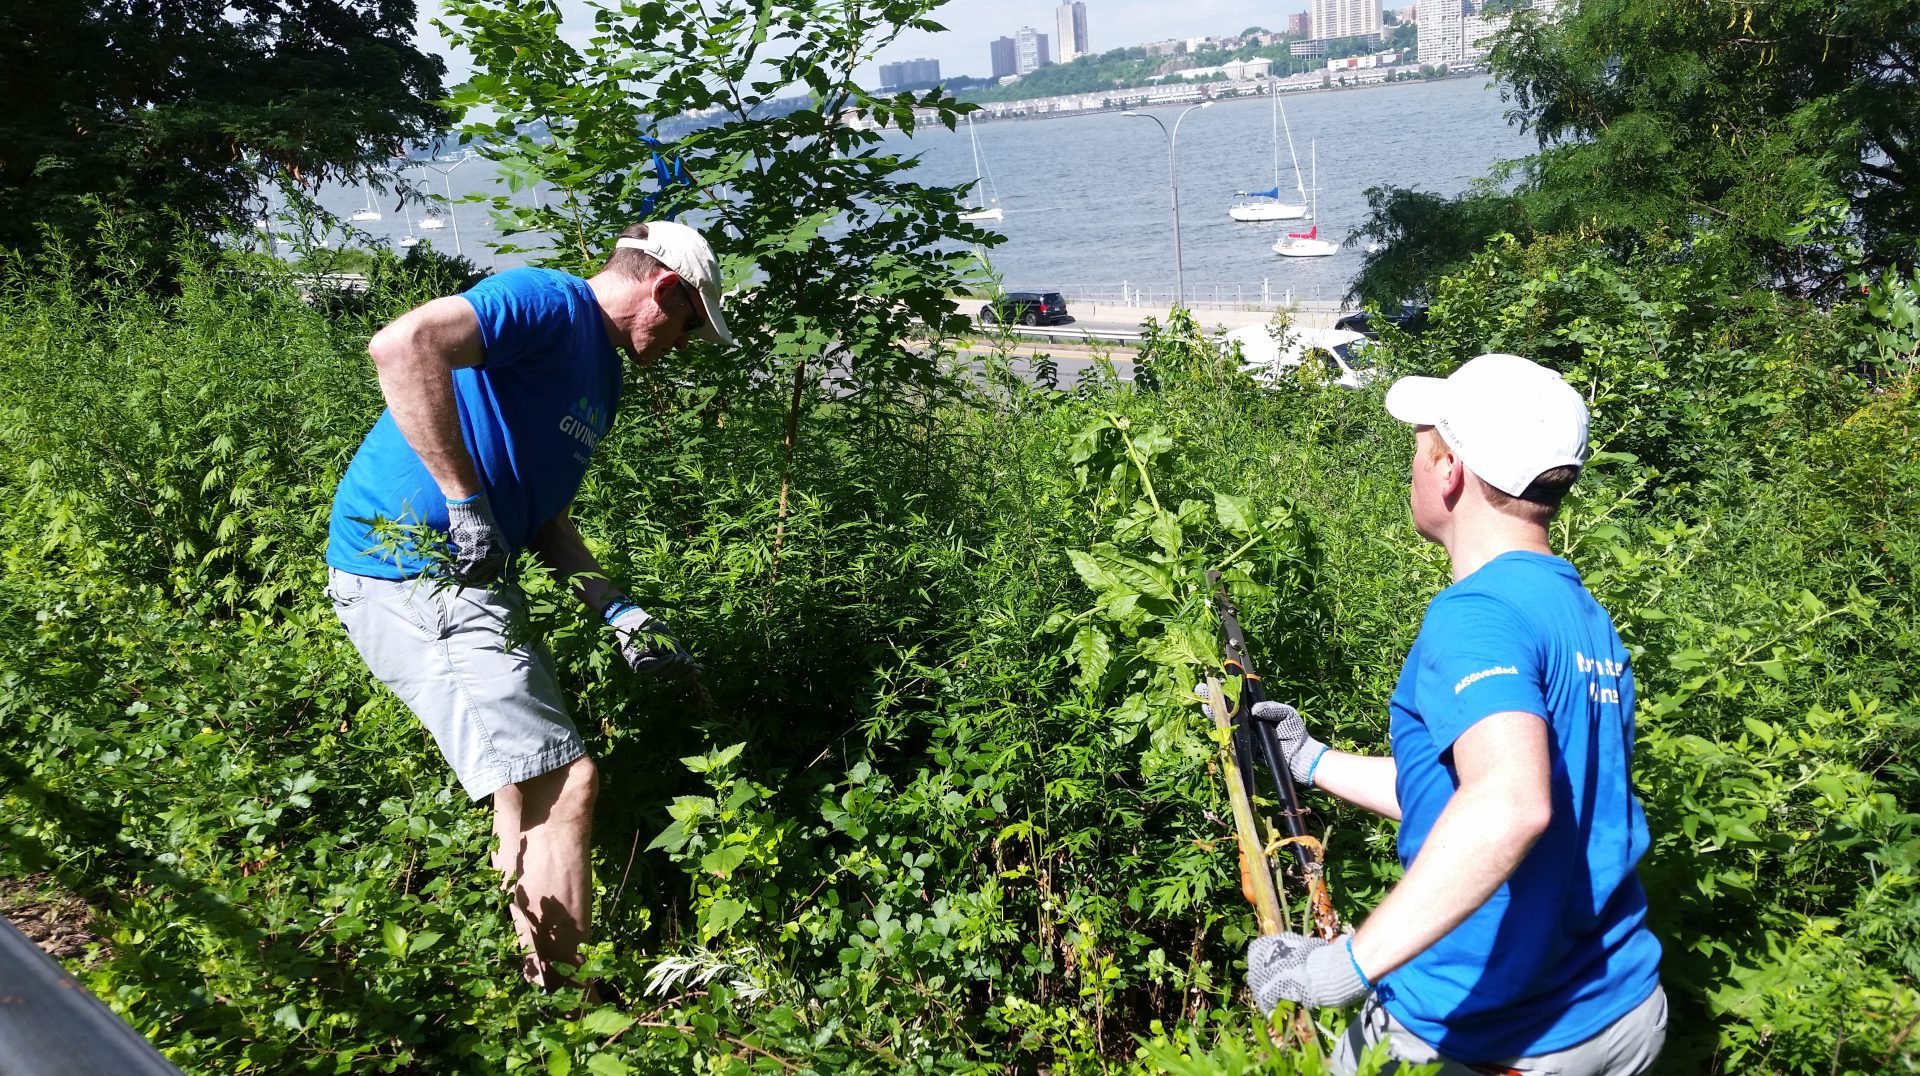 Two people weed invasive plants from a slope